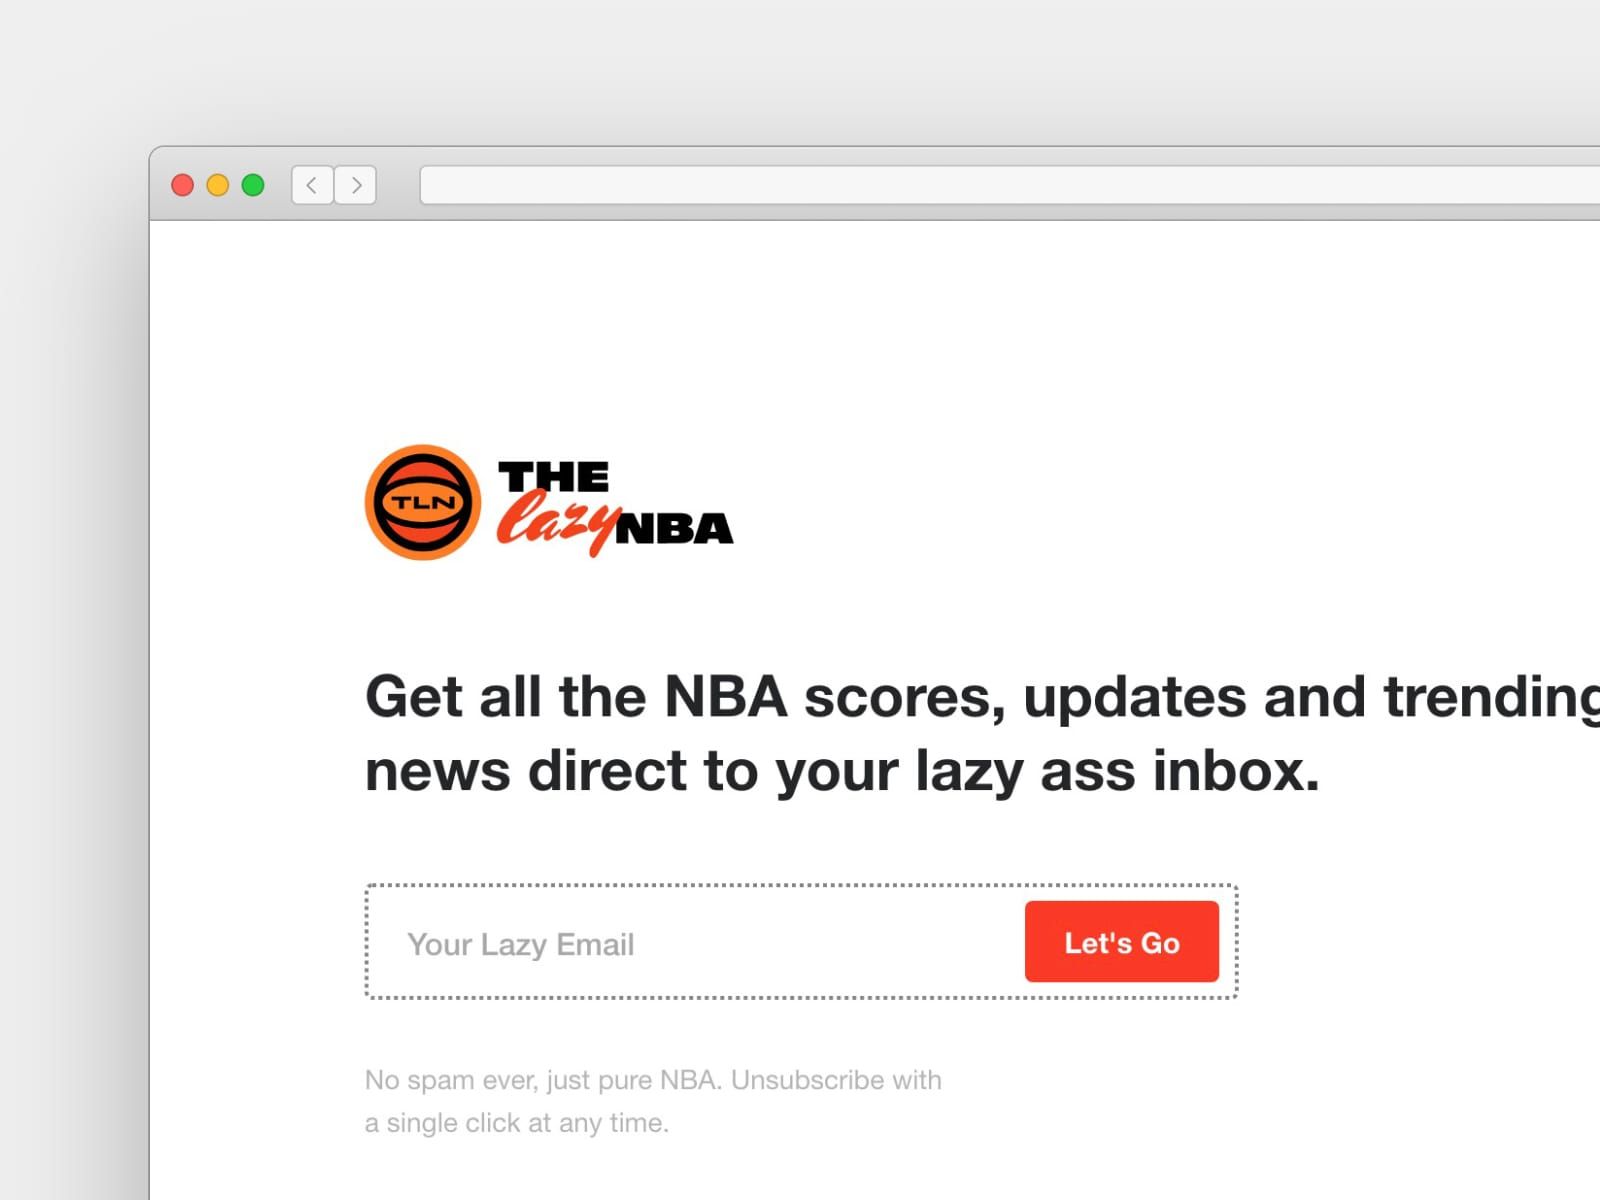 The Lazy MBA's exciting subscribe button saying "Let's Go"